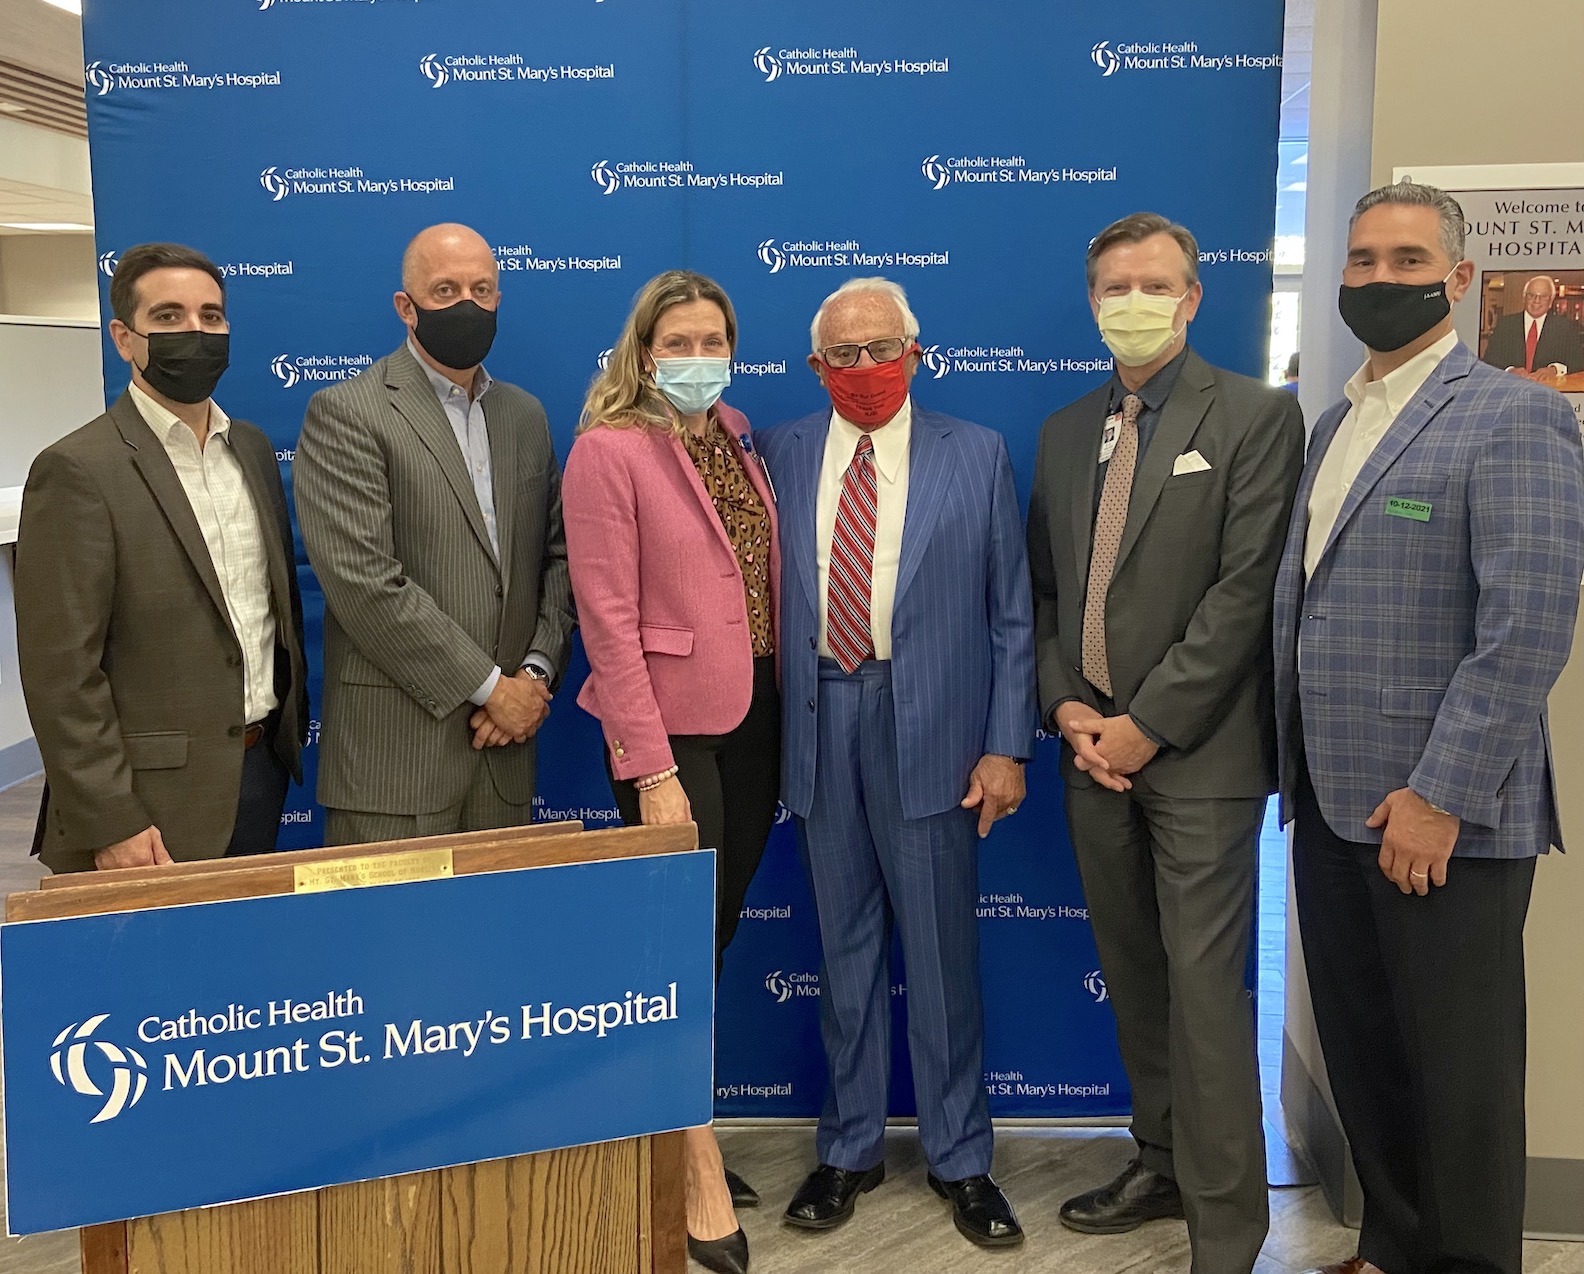 Pictured, from left: Mount St. Mary's Foundation Board Treasurer Robert Ingrasci, Vice Chair Anthony Eugeni, Executive Director Julie Berrigan, Russell Salvatore, Mount St. Mary's Hospital President CJ Urlaub, and Chair Joseph Ieraci.